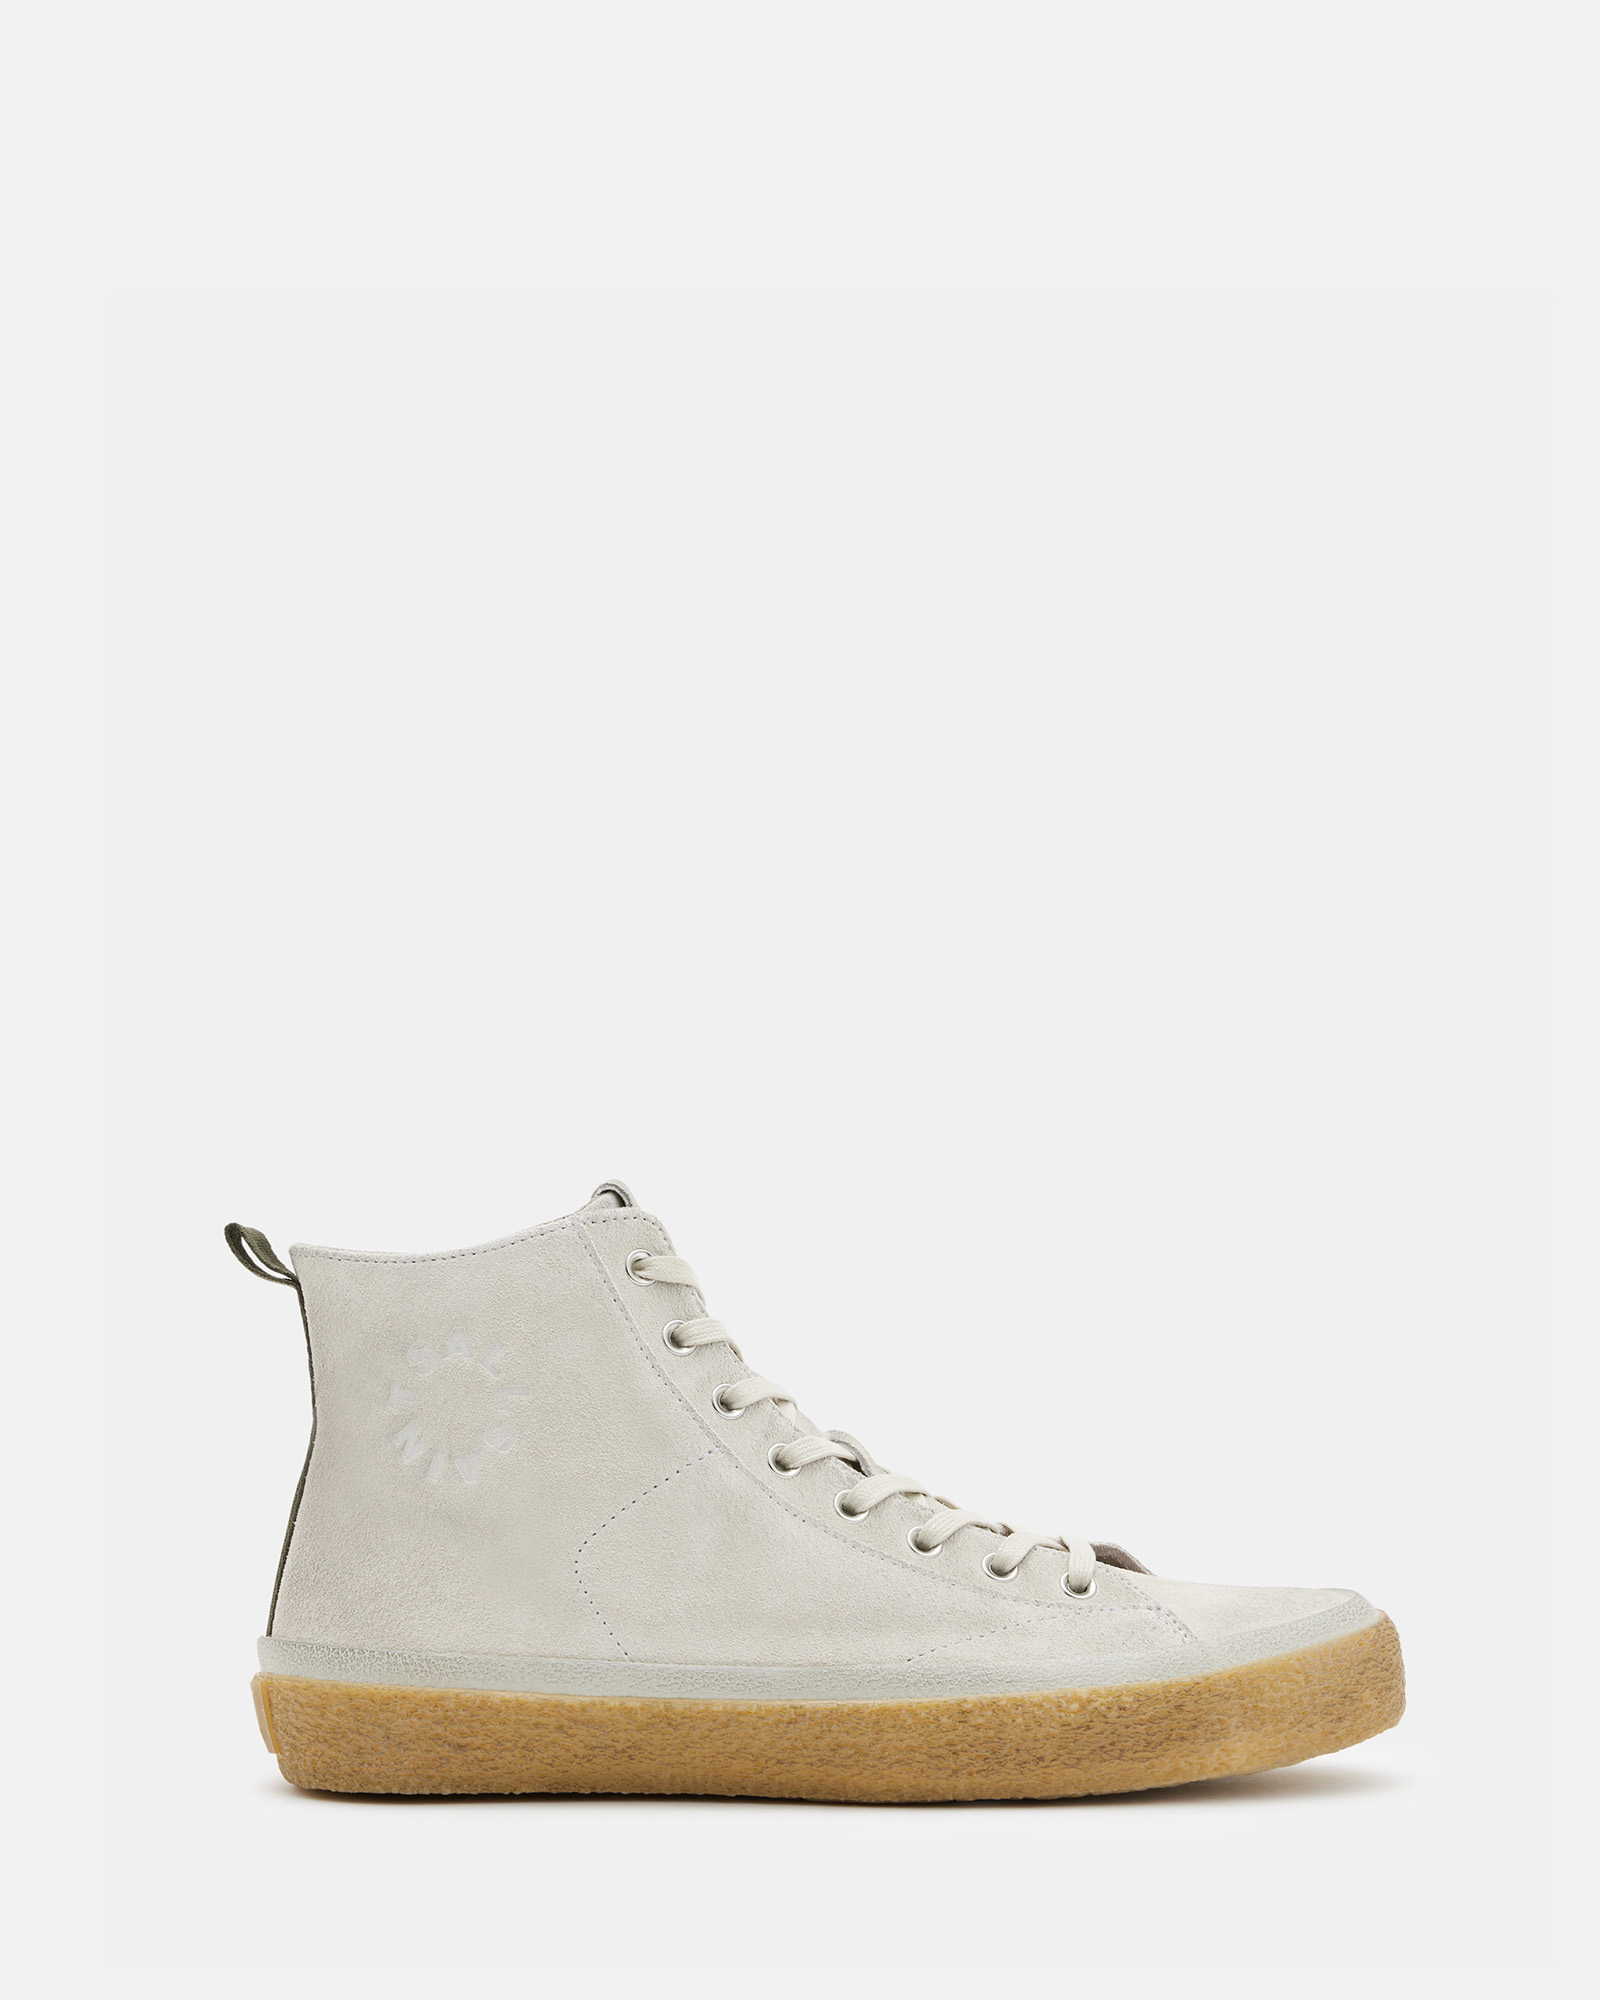 Allsaints Crister Logo Leather High Top Sneakers In Chalk White